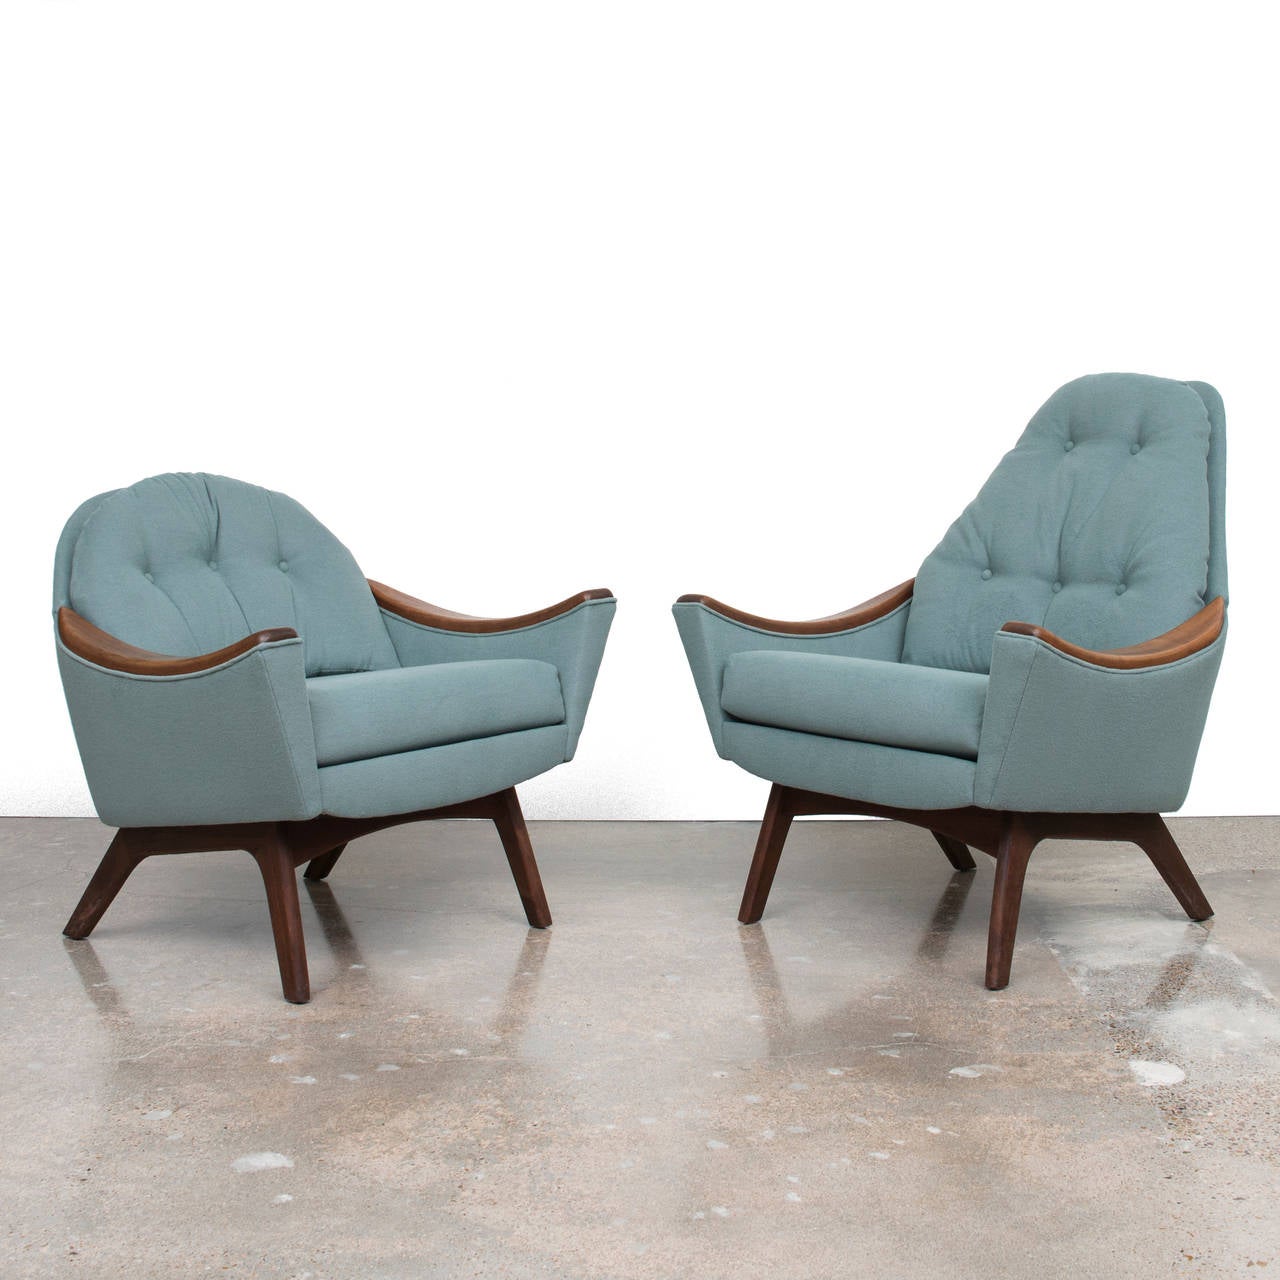 Adrian Pearsall for Craft Associates mid century sleigh-form chairs (his & hers) with new upholstery and nice wood detailing.